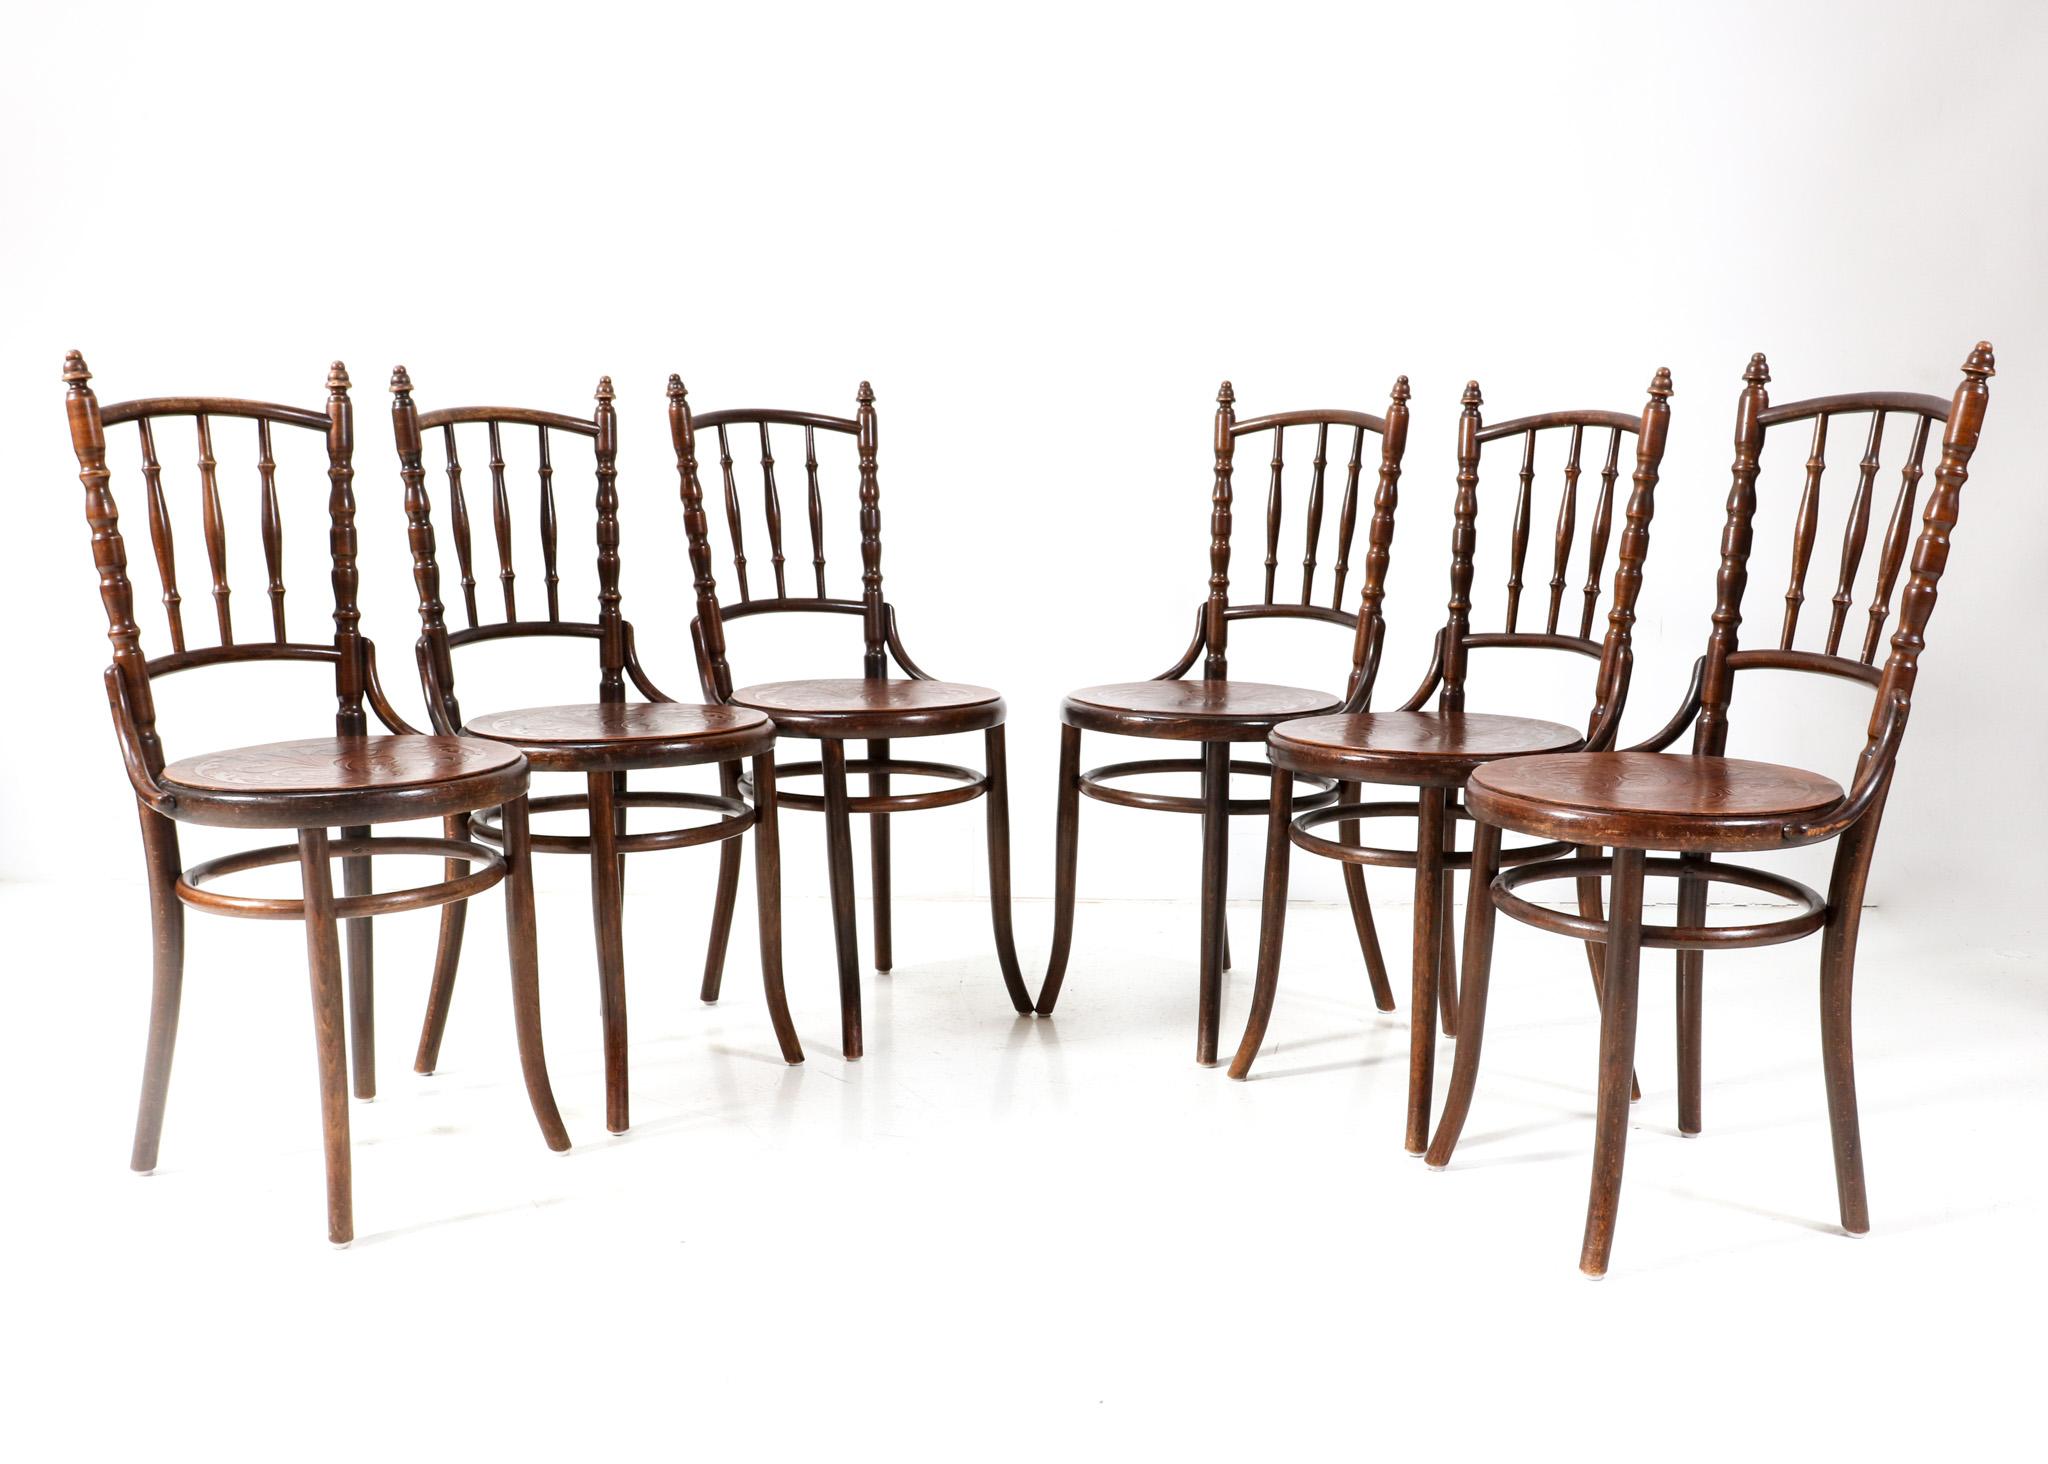 Set of six Art Nouveau bistro chairs.
Design by Fischel Austria.
Striking Austrian design from the 1900s.
Solid beech and bentwood frames with original printed wooden seats.
This wonderful set of six Art Nouveau bistro chairs by Fischel Austria is